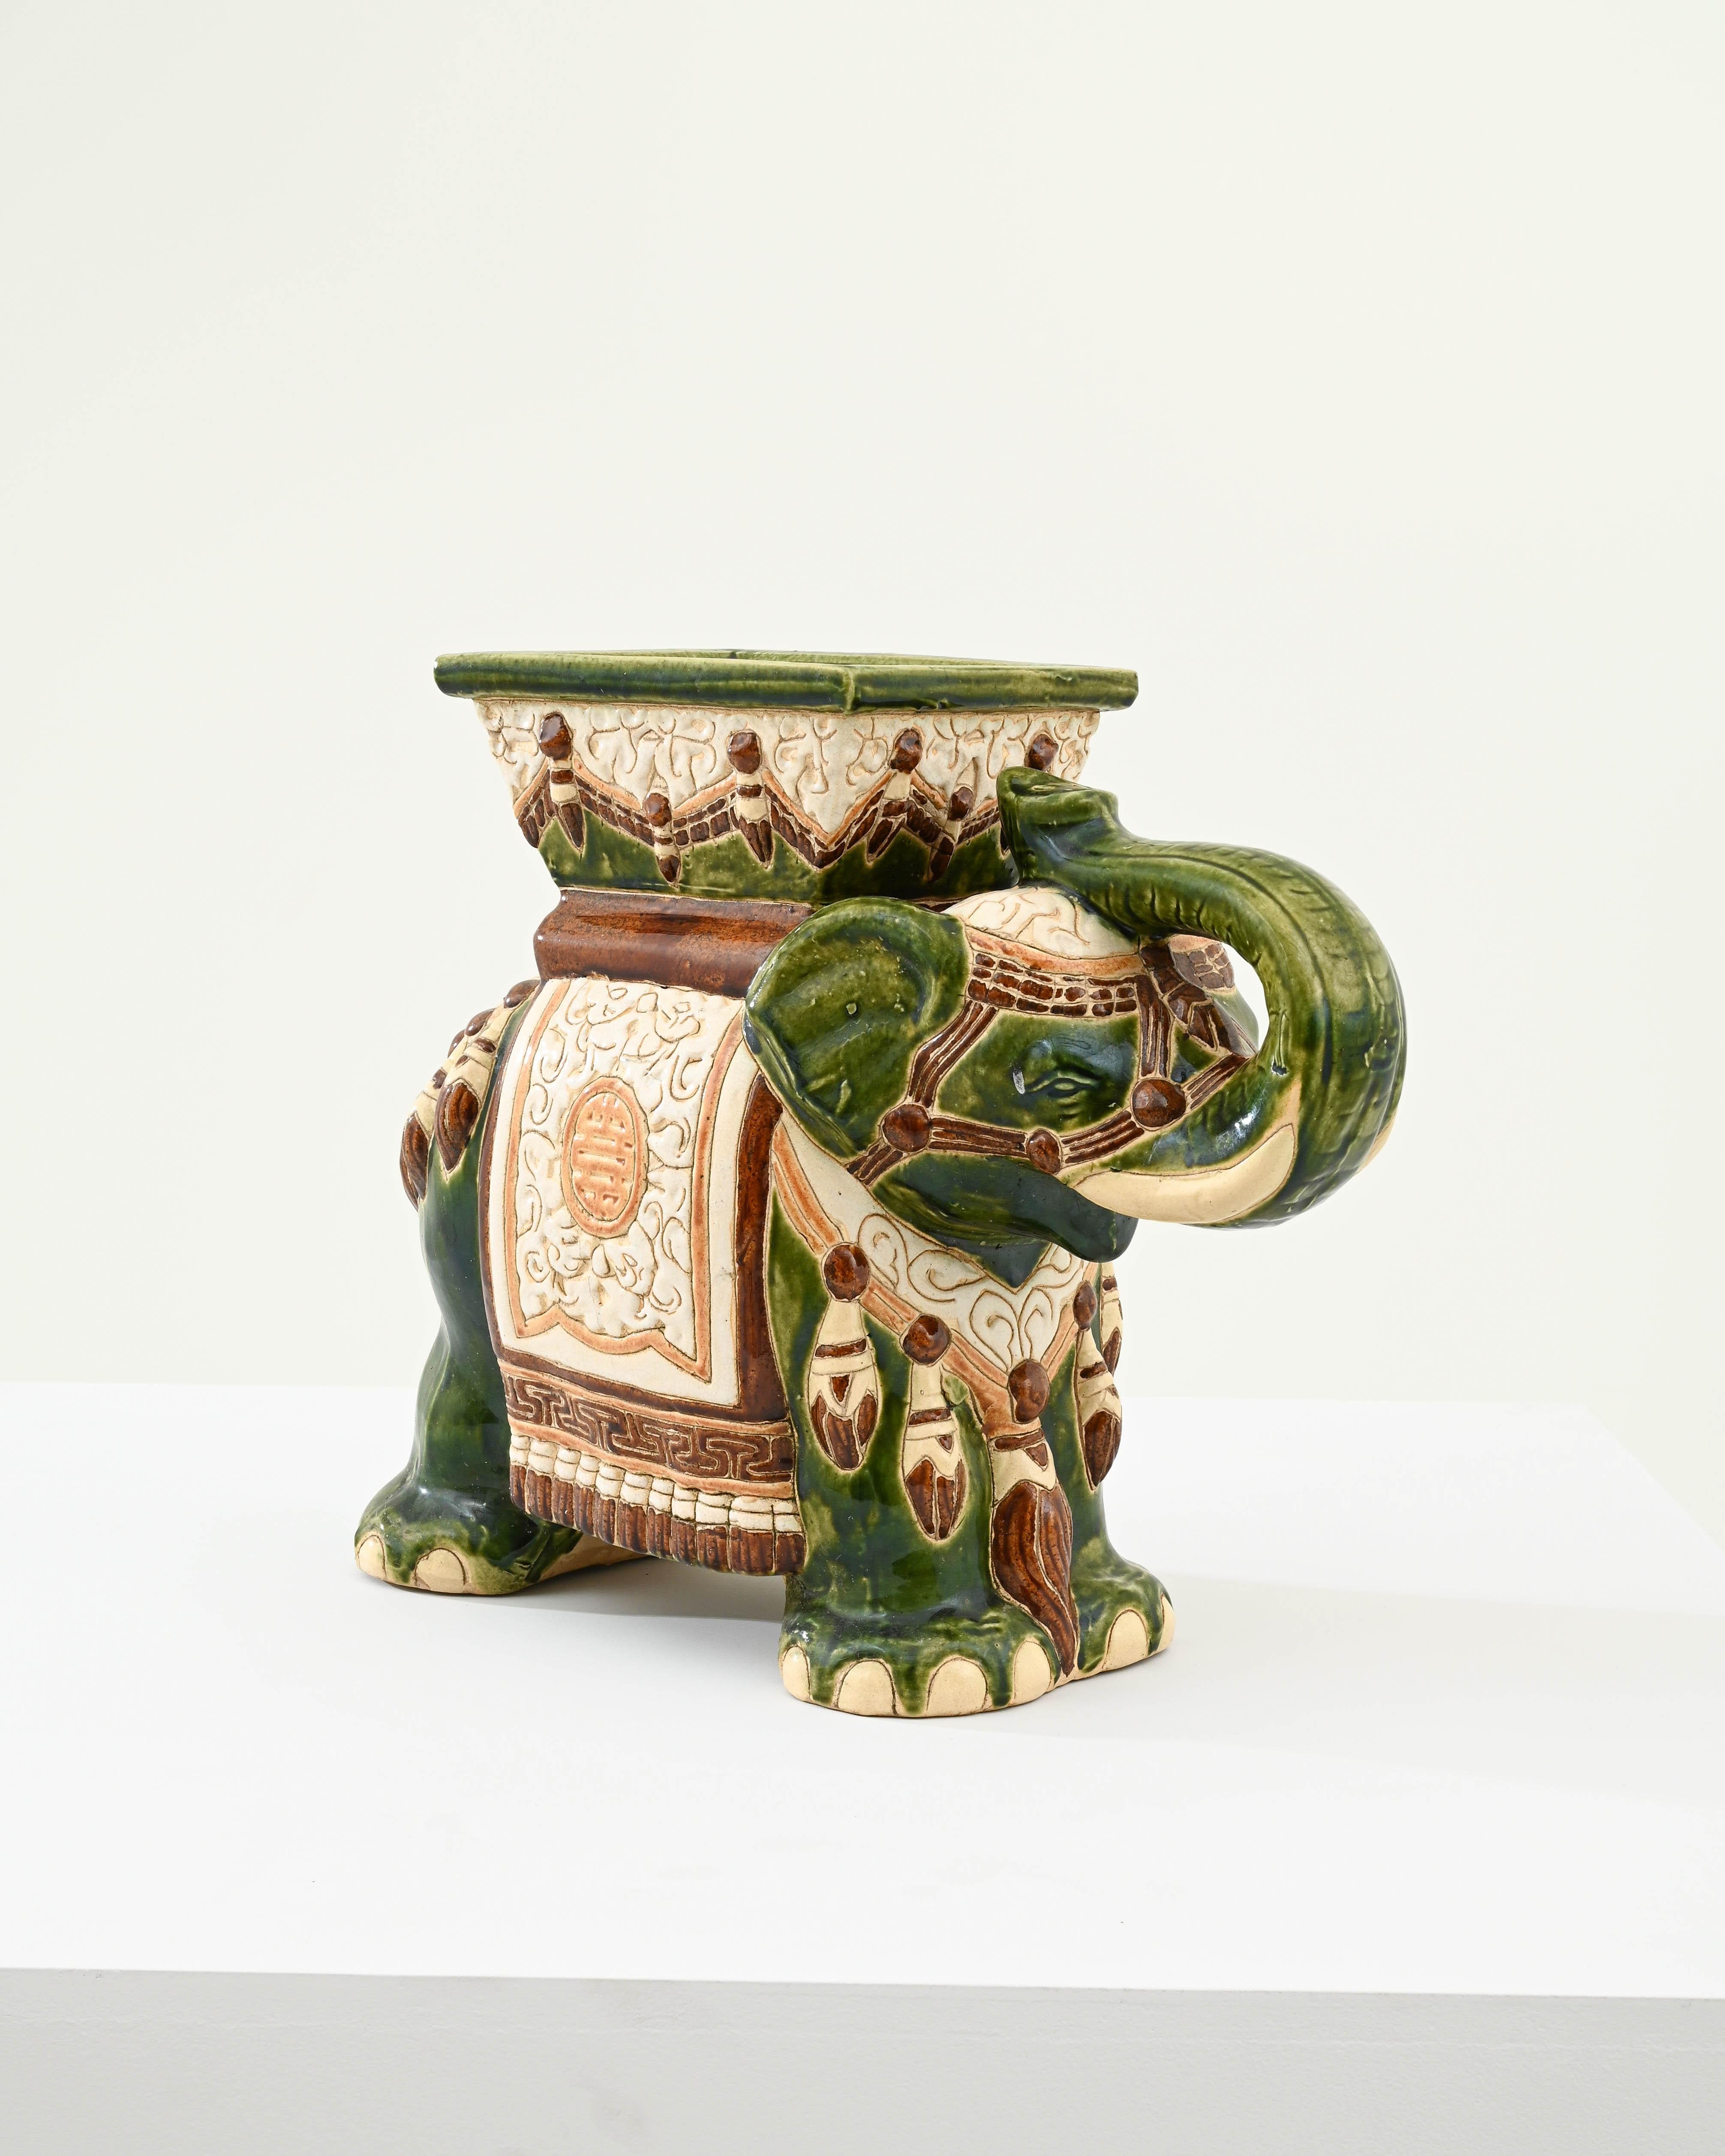 A ceramic decoration from 1960s France in the shape of an elephant. A saddle seat and blanket are glazed with ochre and white, the elephant’s skin glinting a fern-like jade and laced with lines of the earth tone clay body; the assortment of delicate